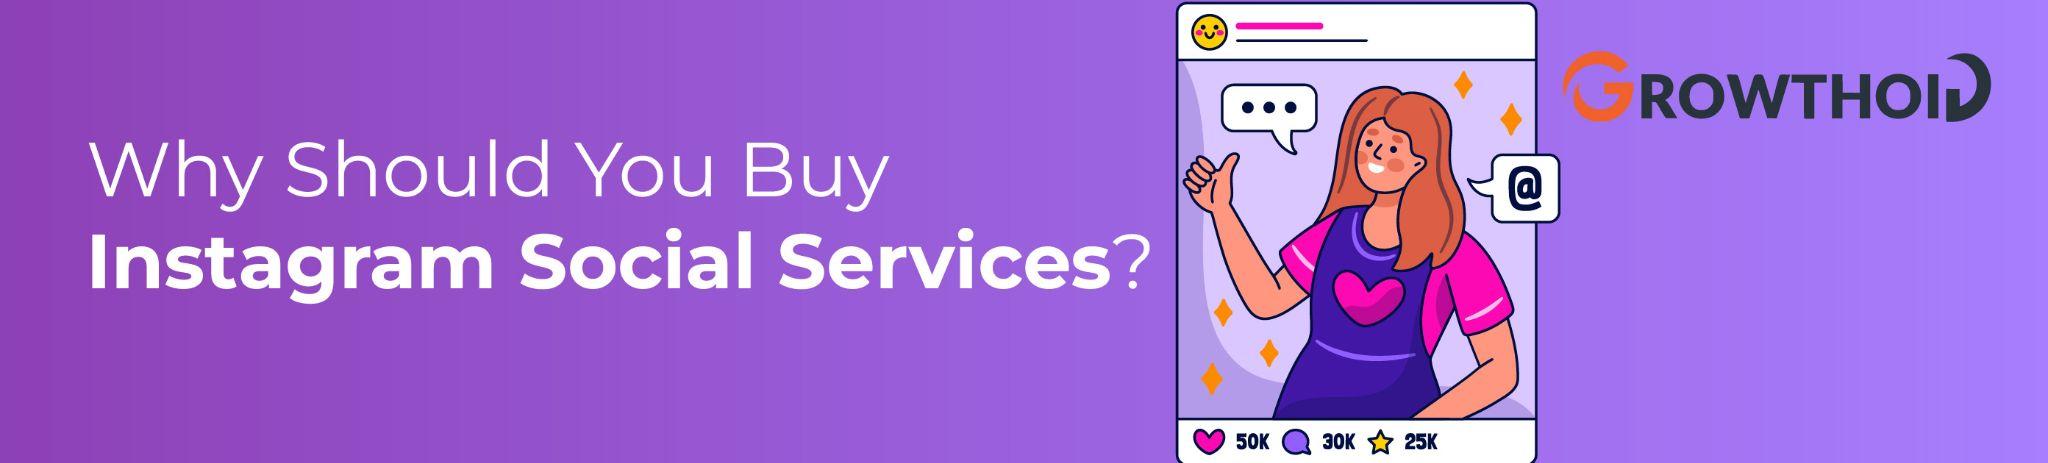 Why Should You Buy Instagram Social Services?